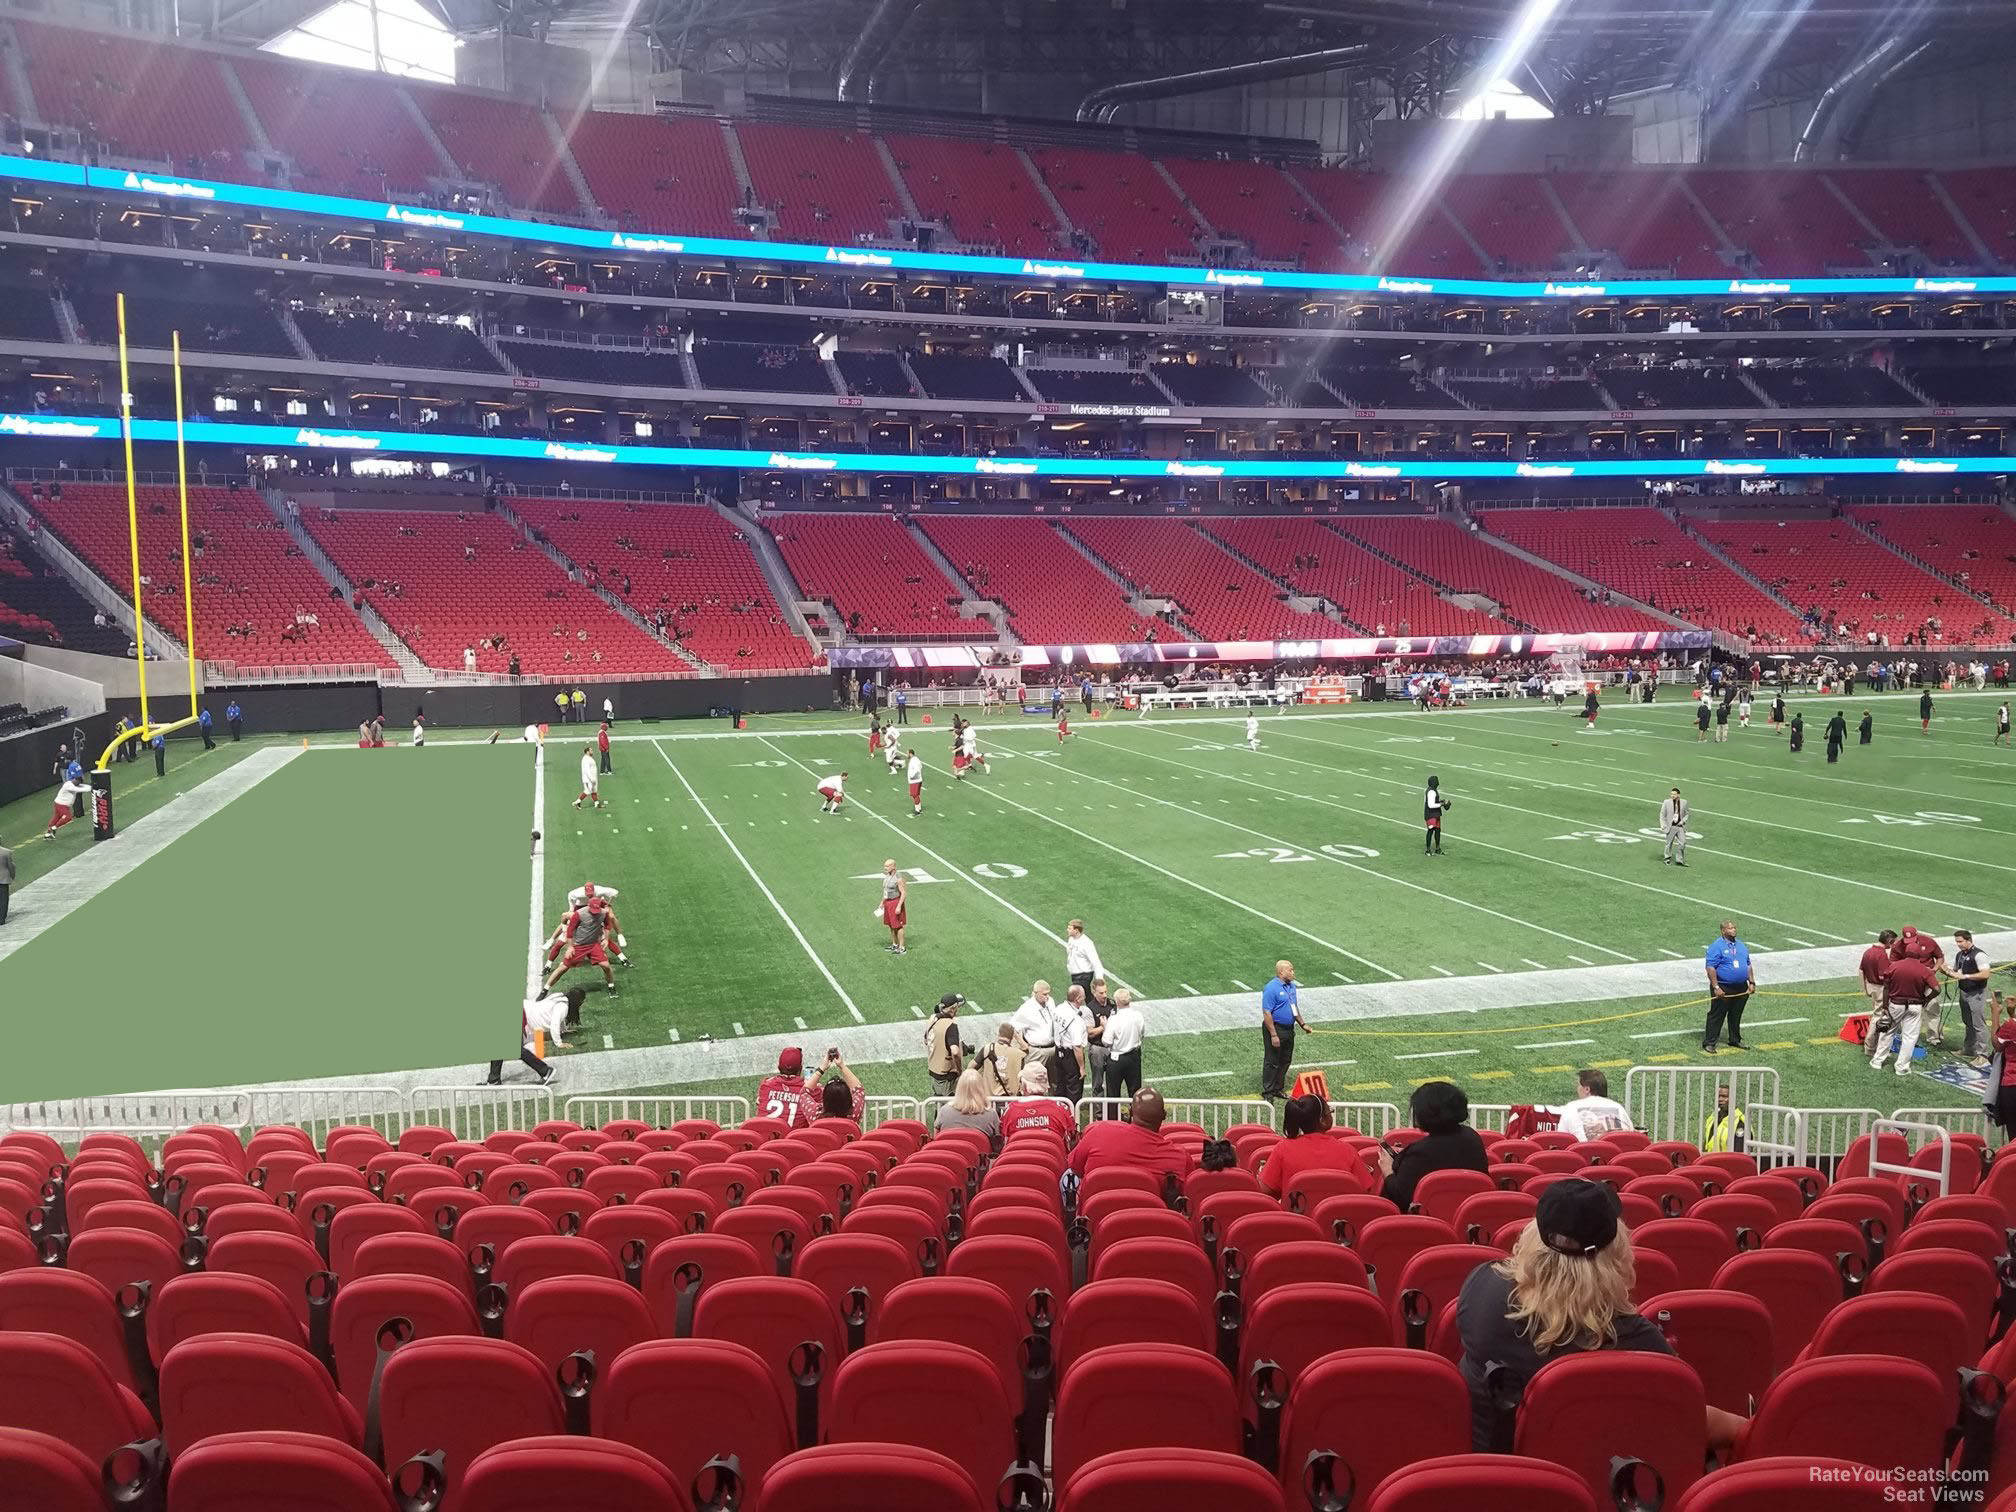 section 132, row 15 seat view  for football - mercedes-benz stadium